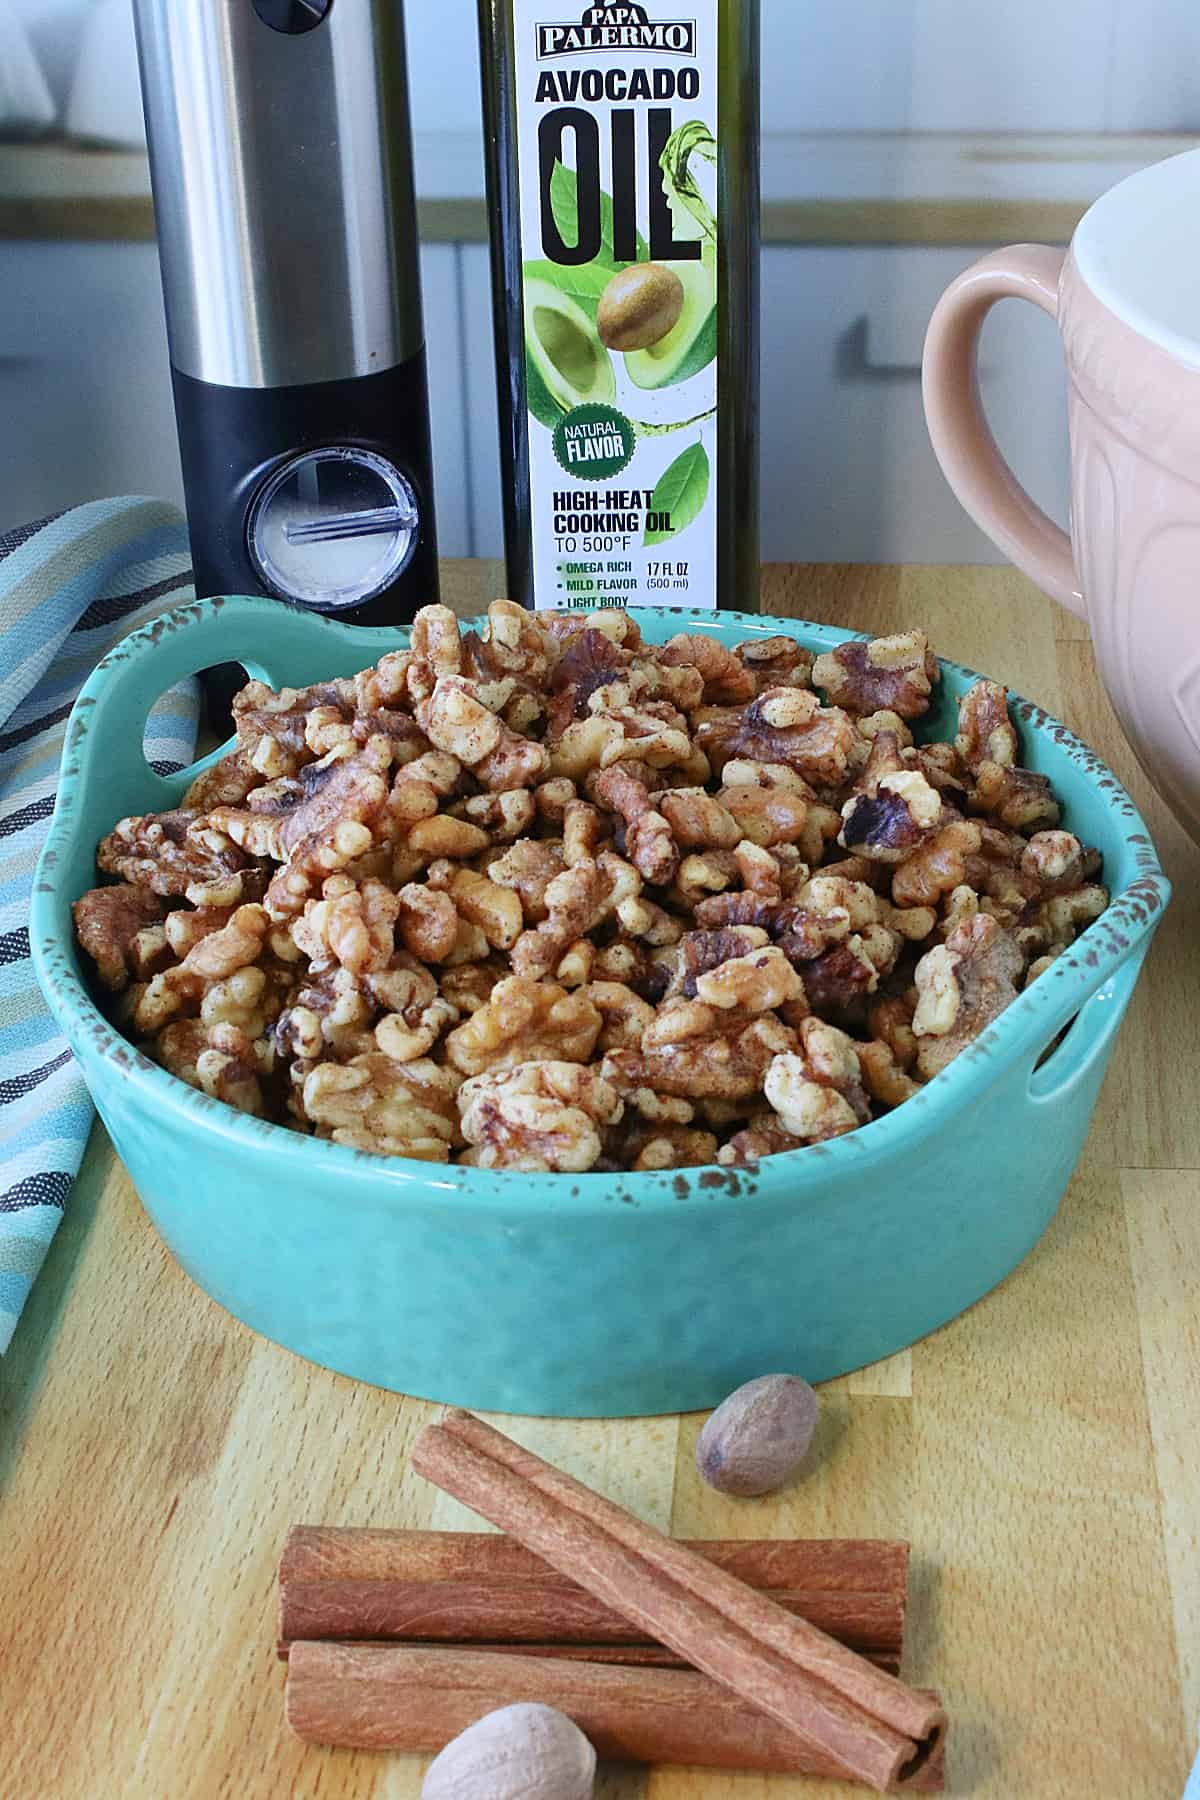 Cinnamon sticks and nutmeg pods in front of a bowl of Cinnamon Roasted Walnuts.